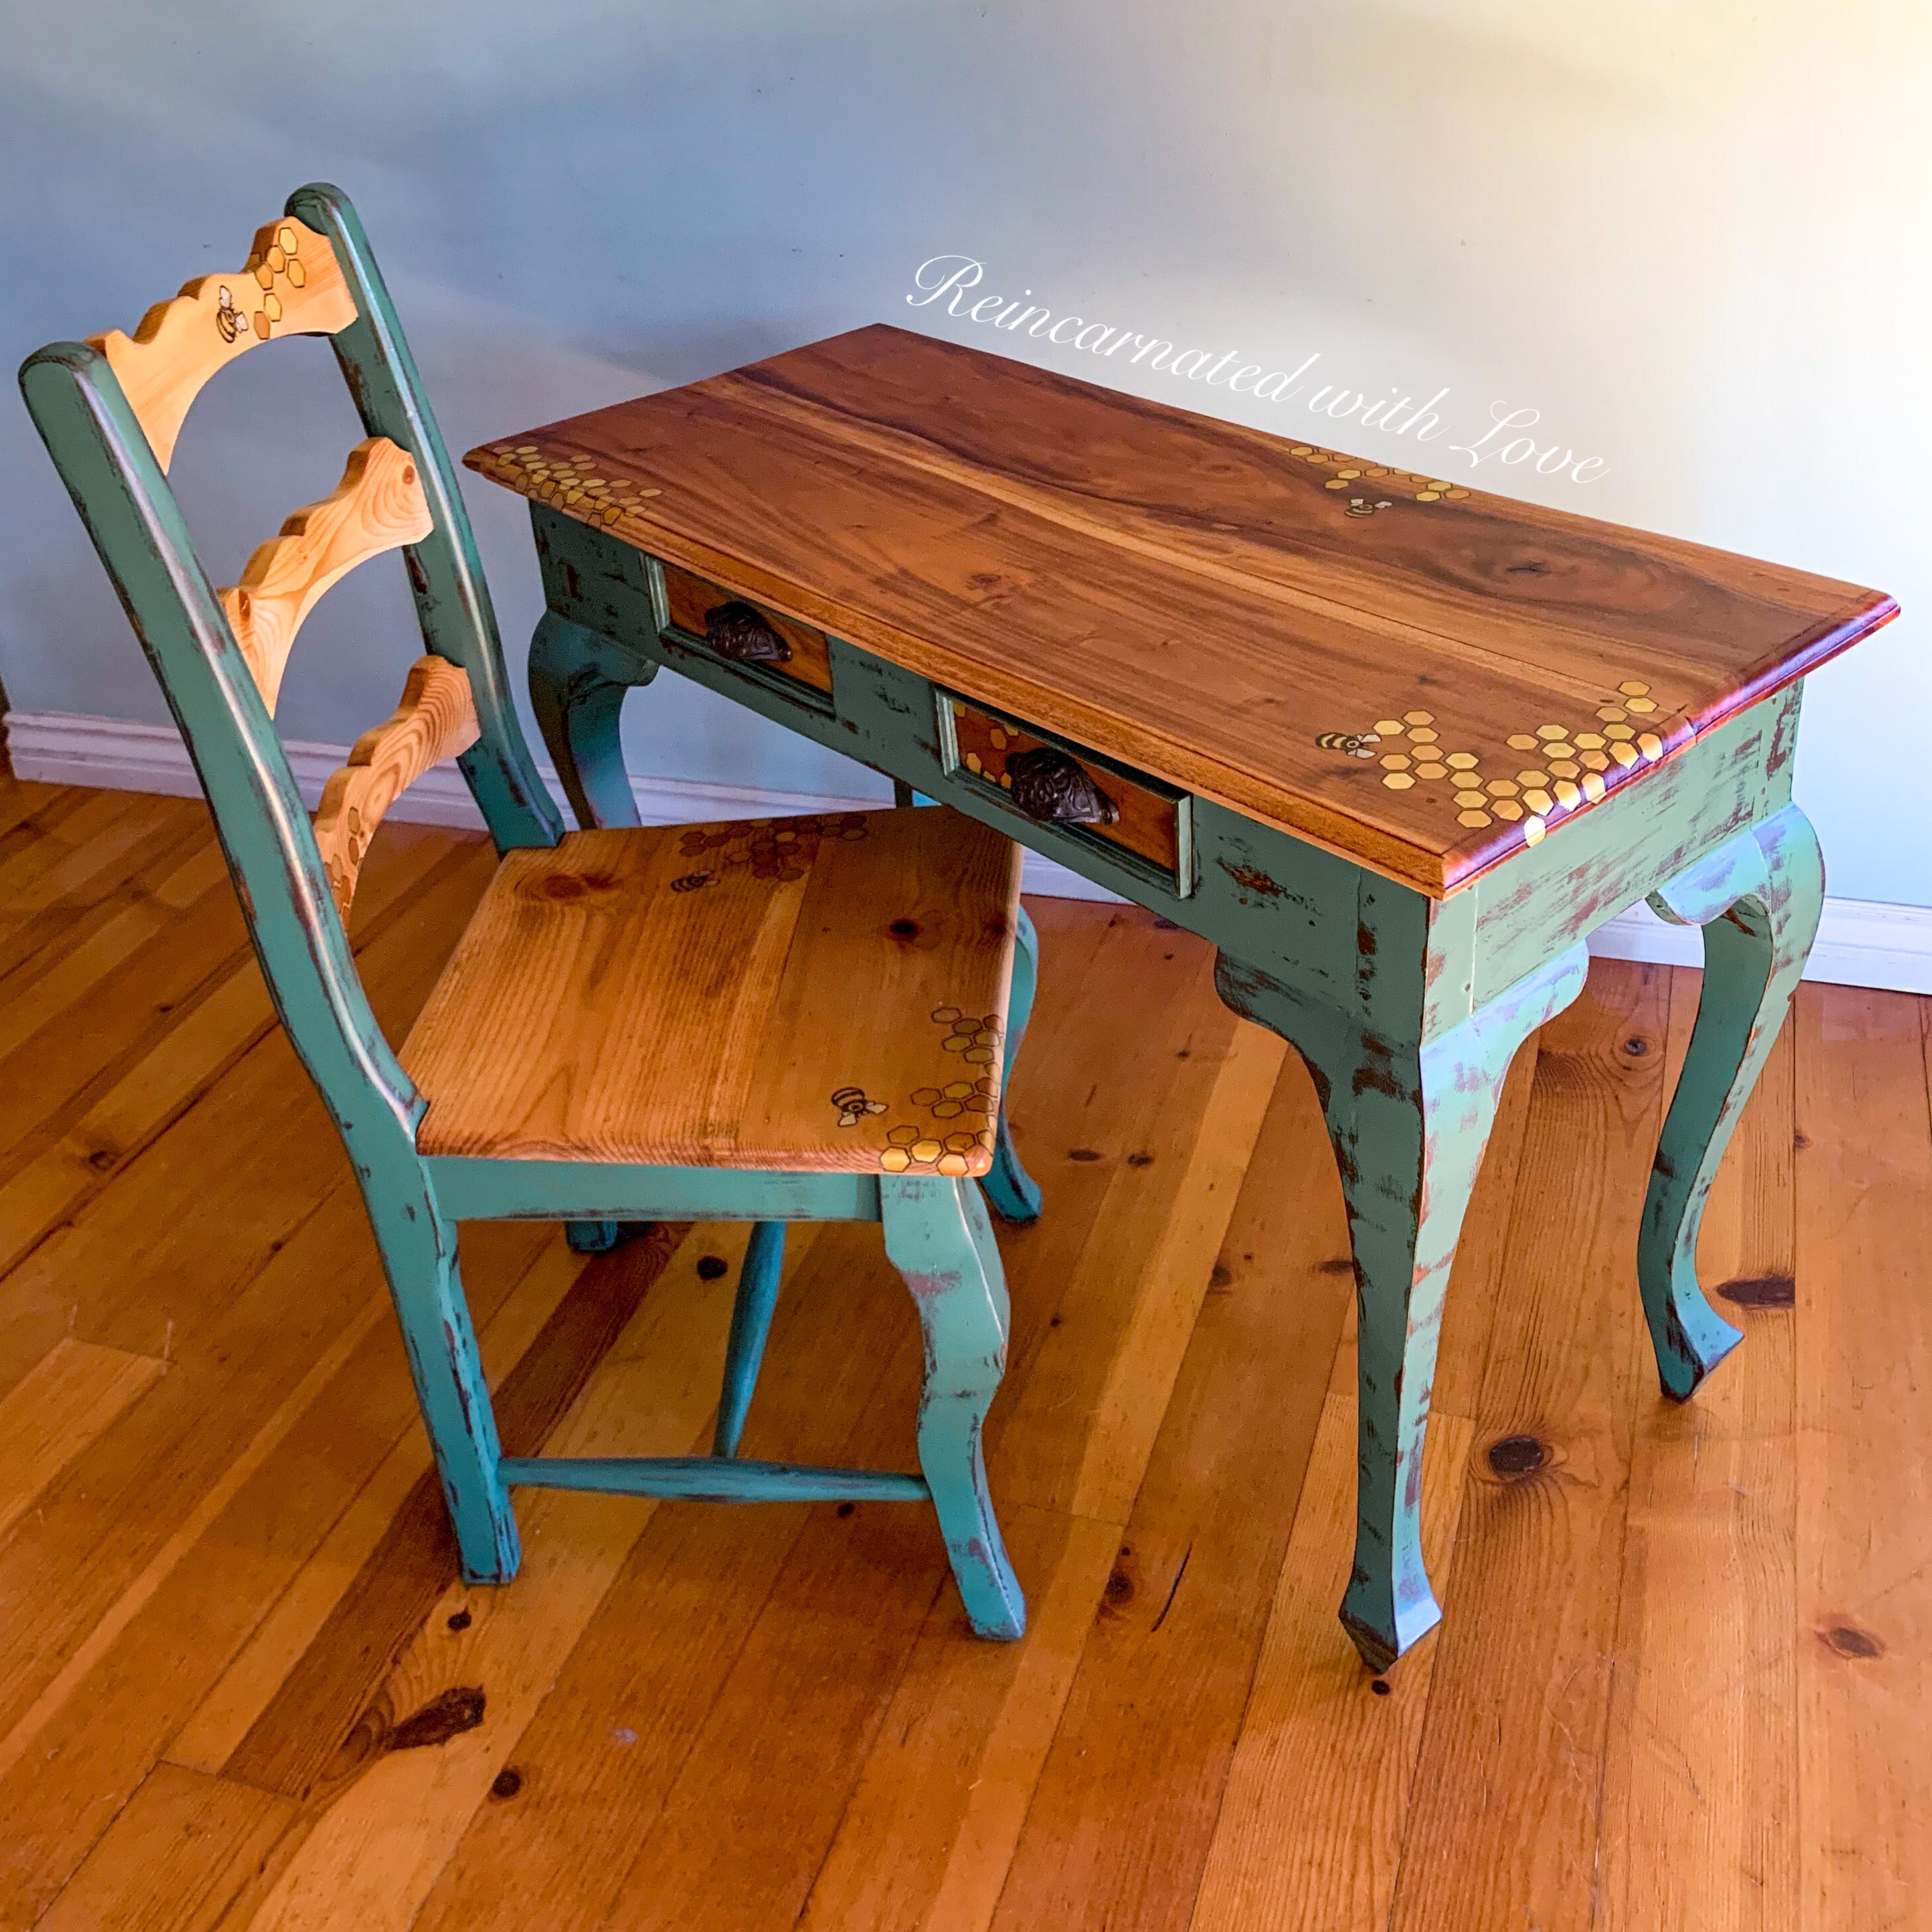 A french country desk & chair set done in stained wood & distressed green trim, with honeycomb & tiny bee accents.